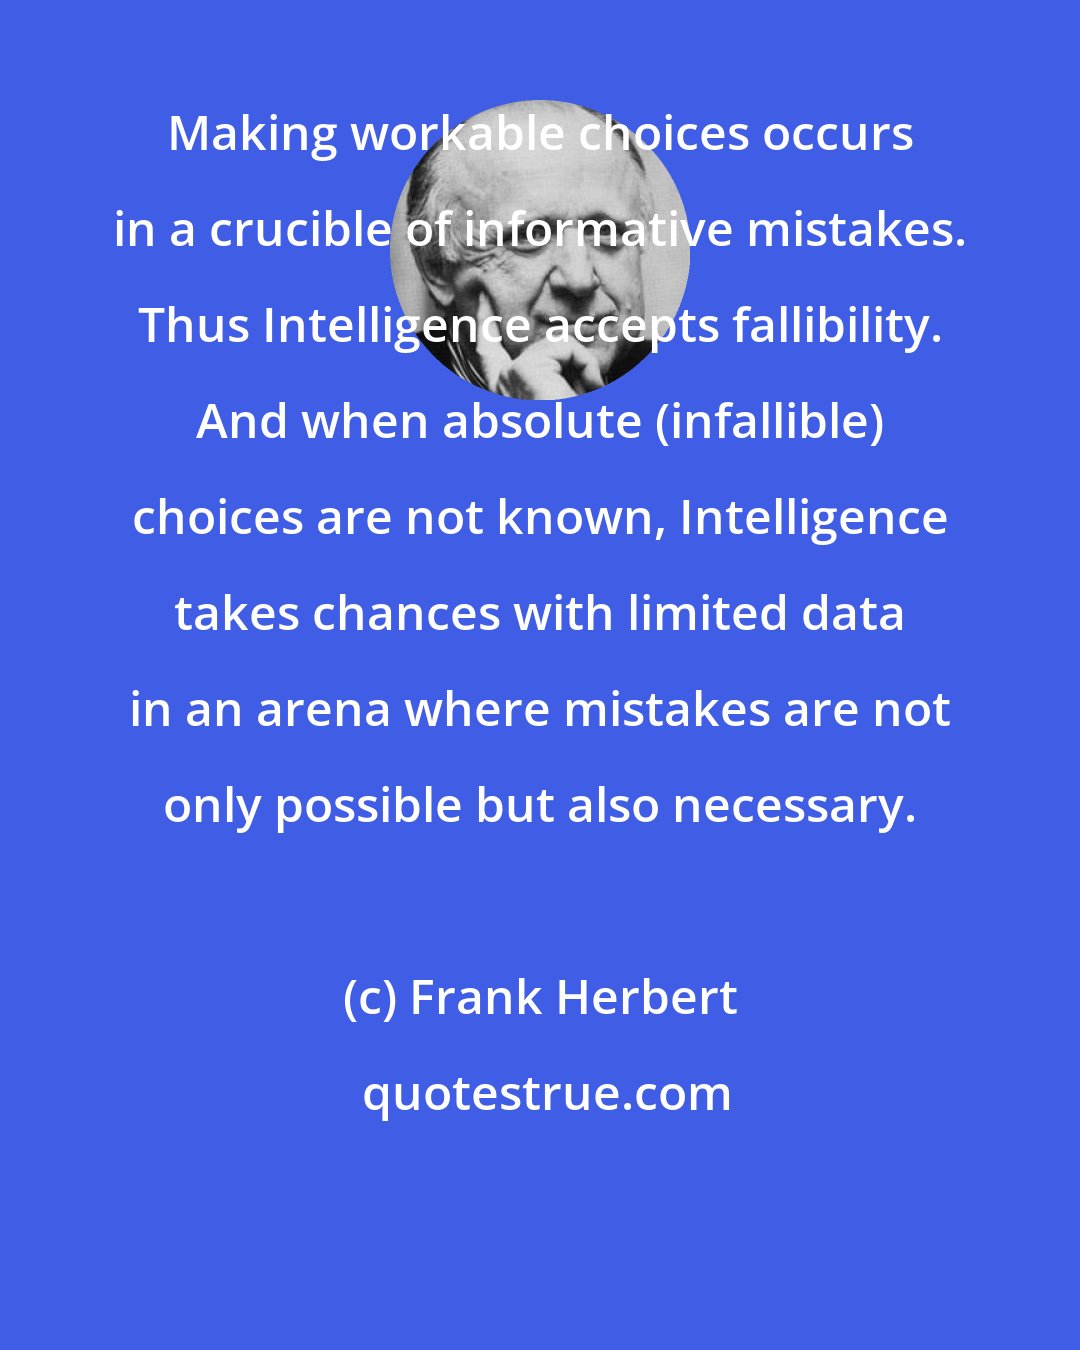 Frank Herbert: Making workable choices occurs in a crucible of informative mistakes. Thus Intelligence accepts fallibility. And when absolute (infallible) choices are not known, Intelligence takes chances with limited data in an arena where mistakes are not only possible but also necessary.